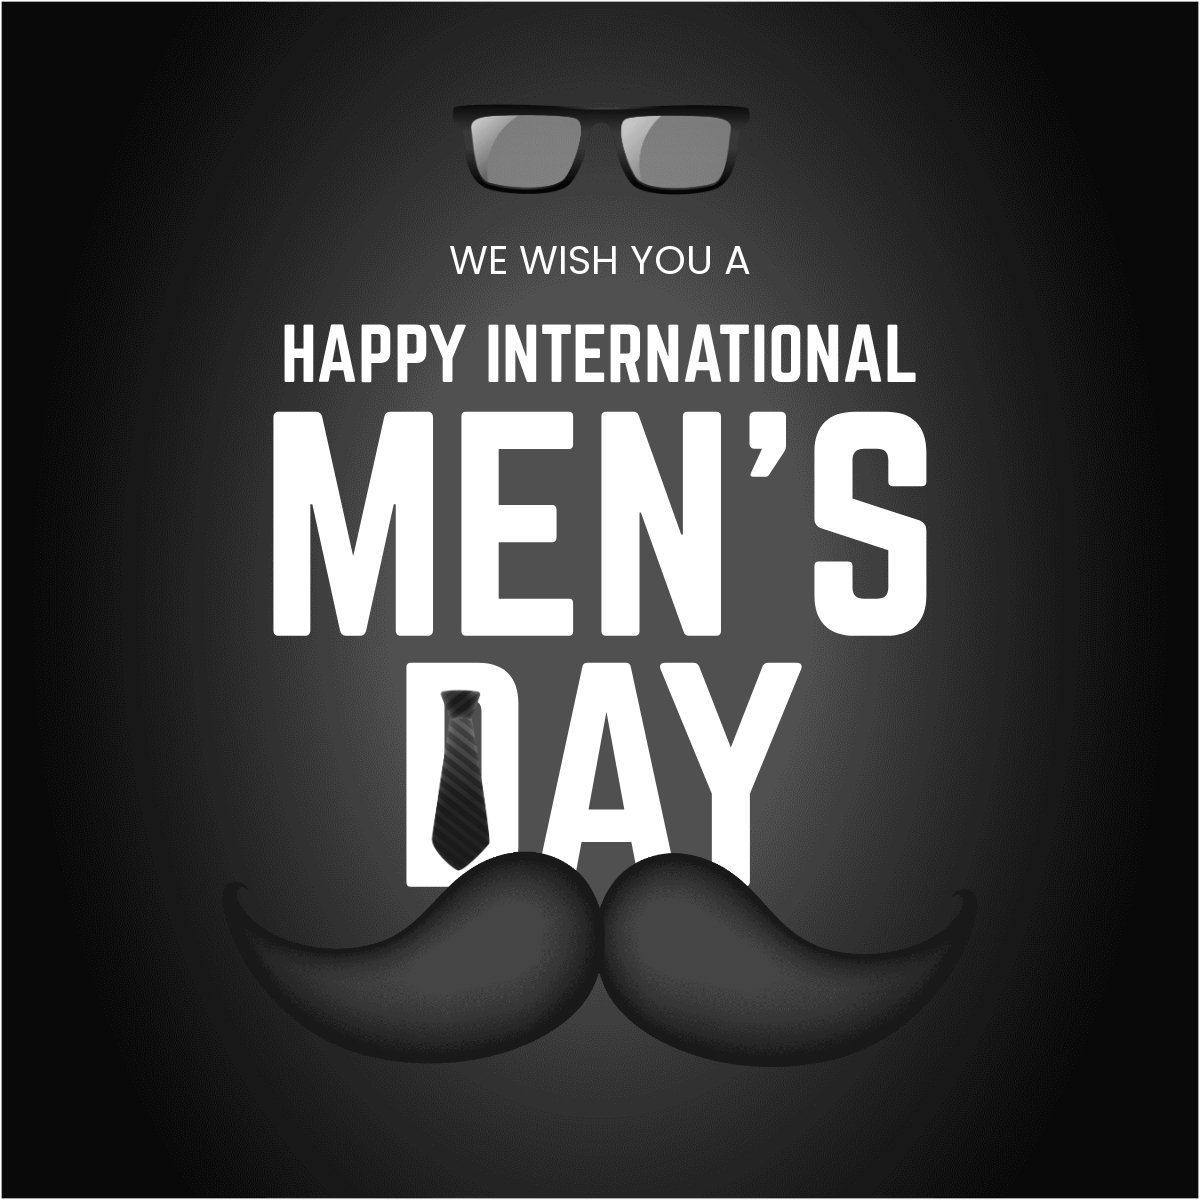 Free International Mens Day Wishes Linkedin Post Template